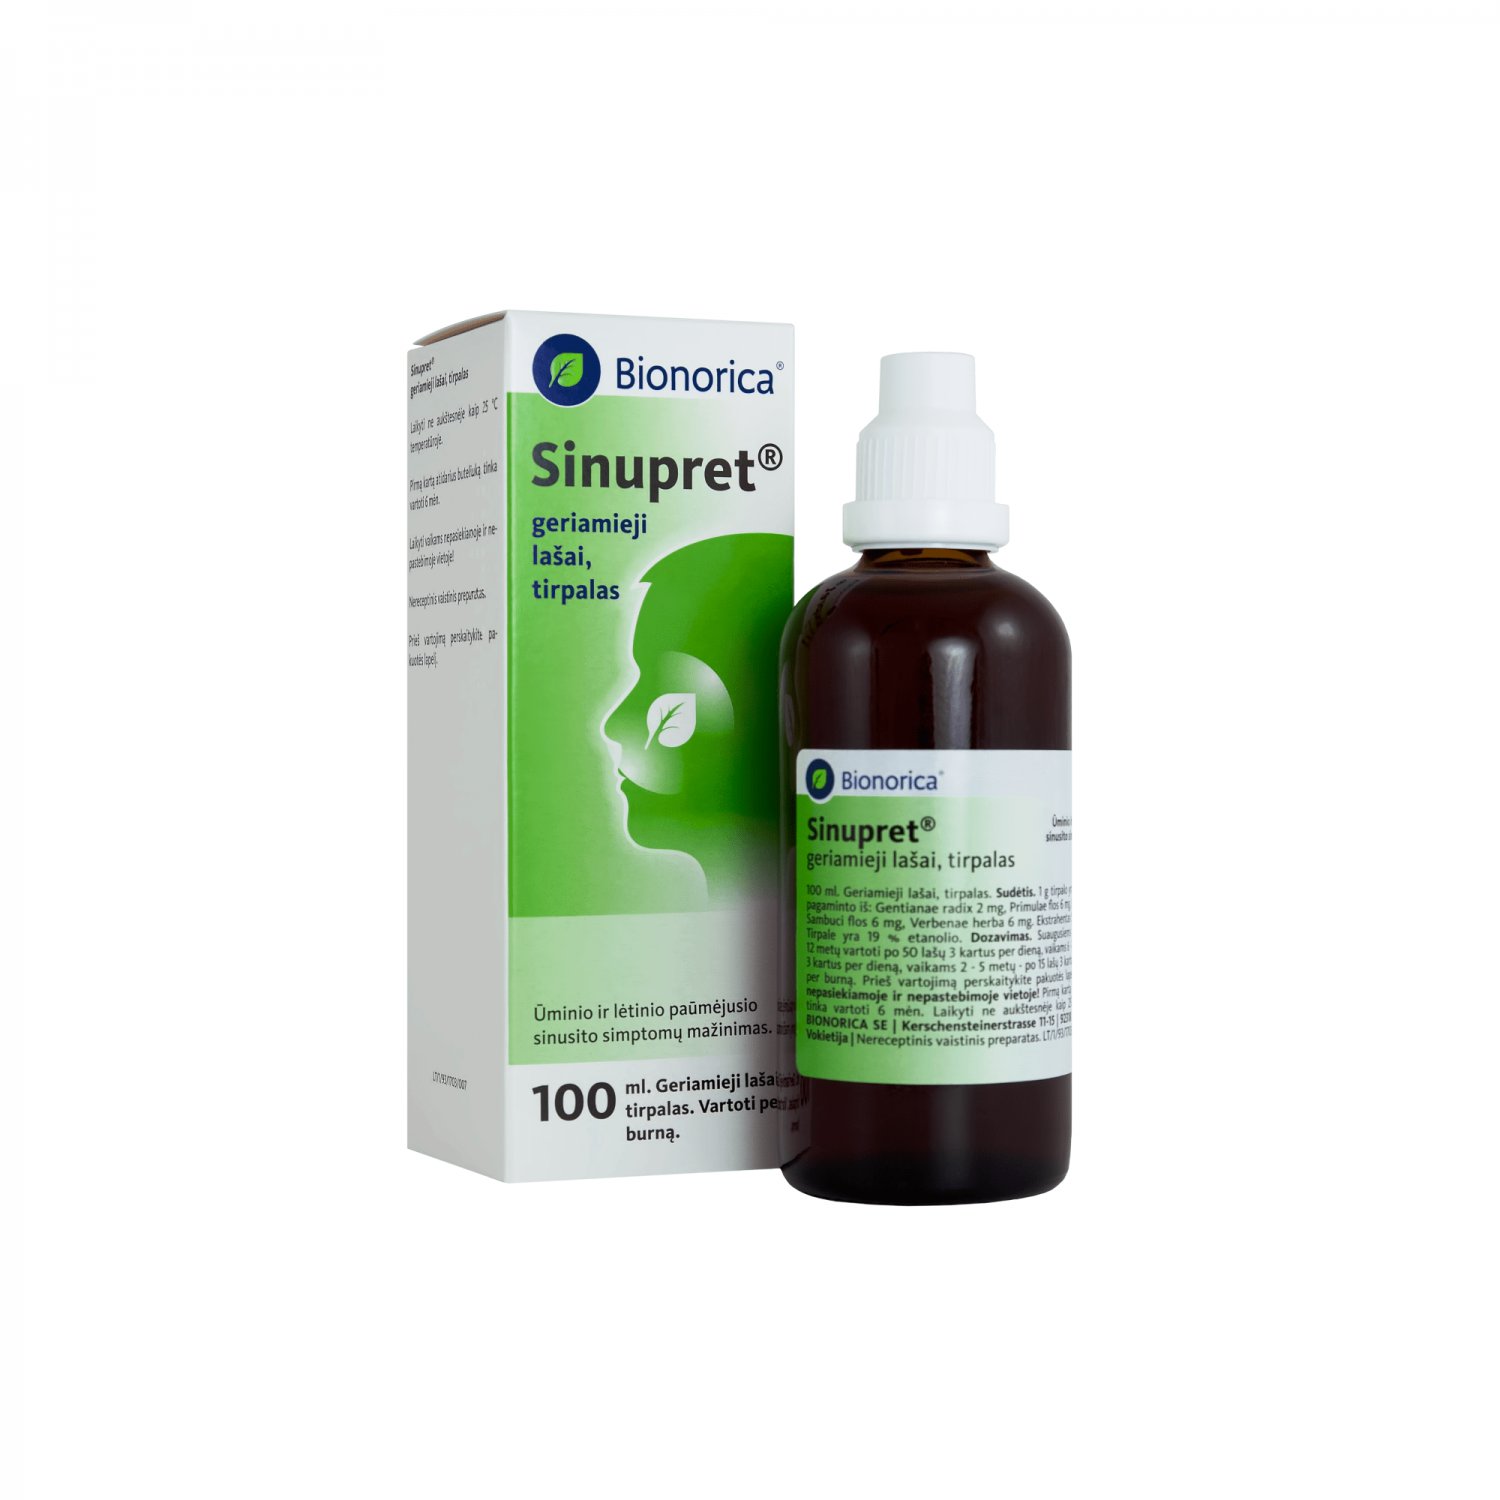 Sinupret Oral Drops 100ml – Support For Healthy Sinus And Respiratory Function